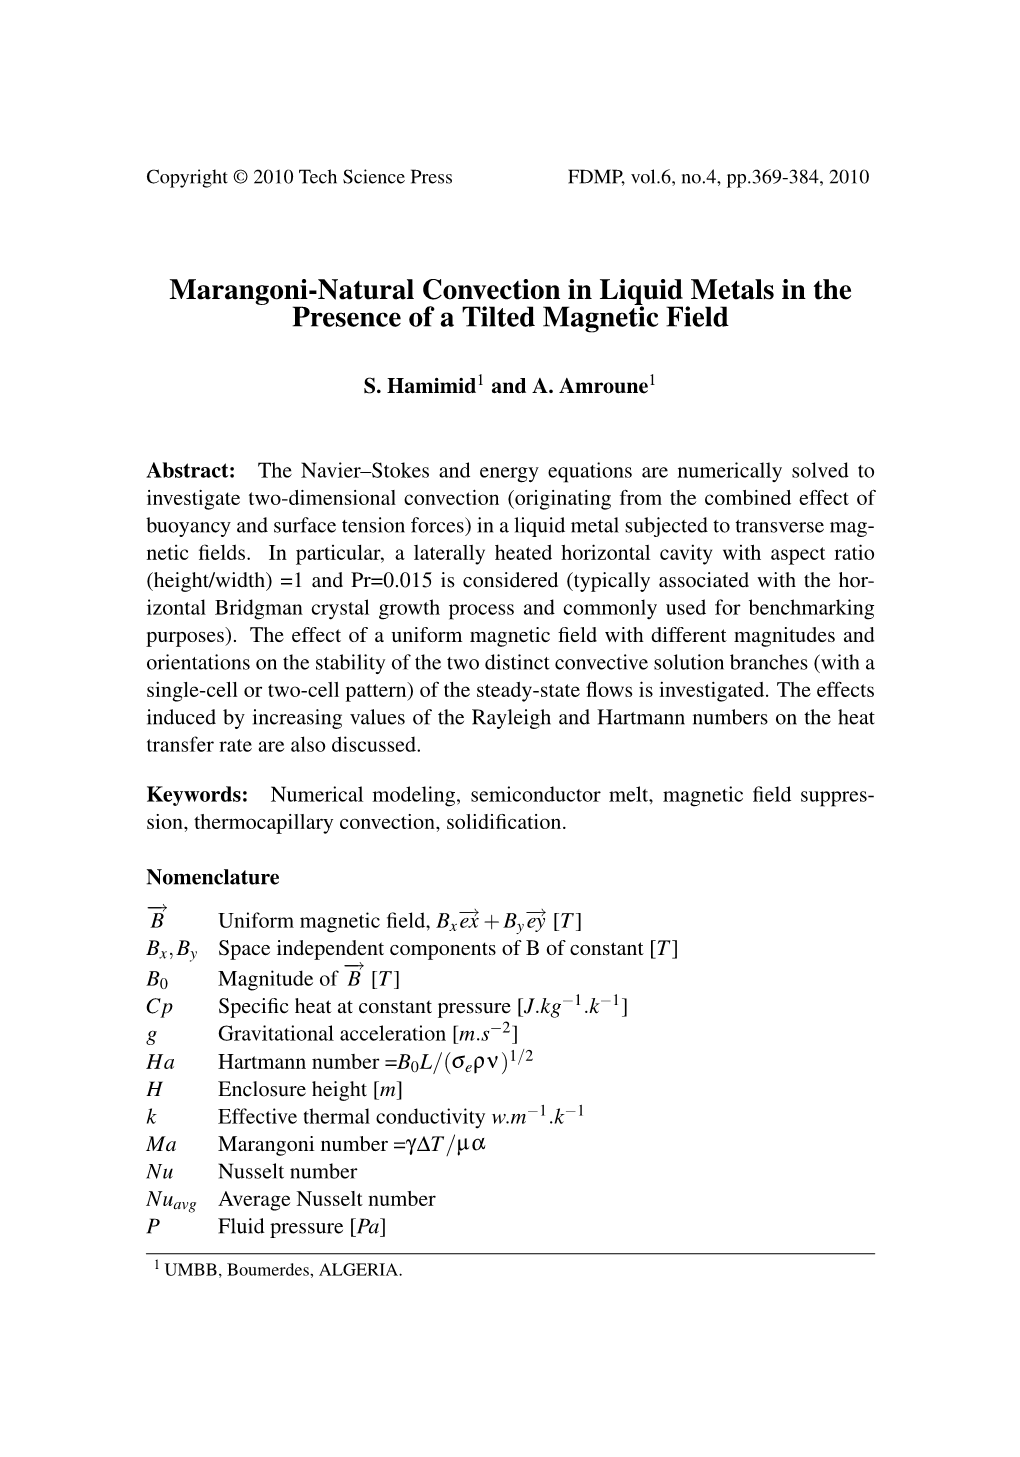 Marangoni-Natural Convection in Liquid Metals in the Presence of a Tilted Magnetic Field